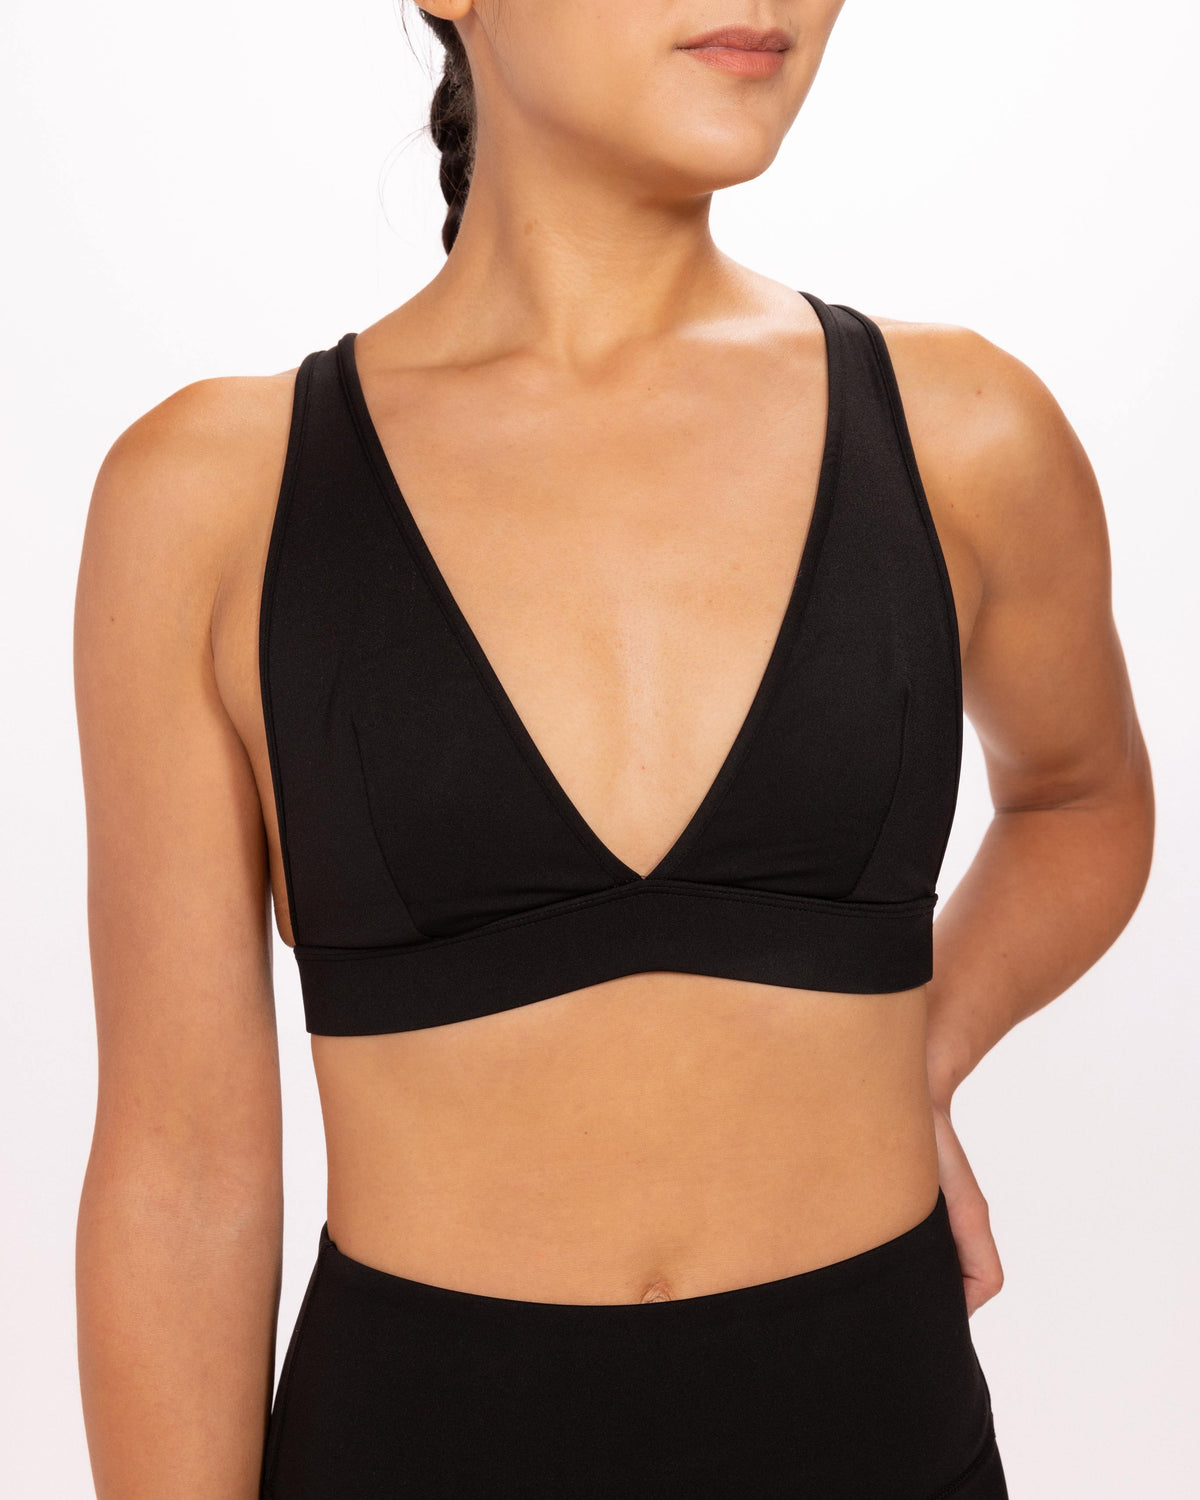 woman wearing lowcut black bralette with removable padding for support